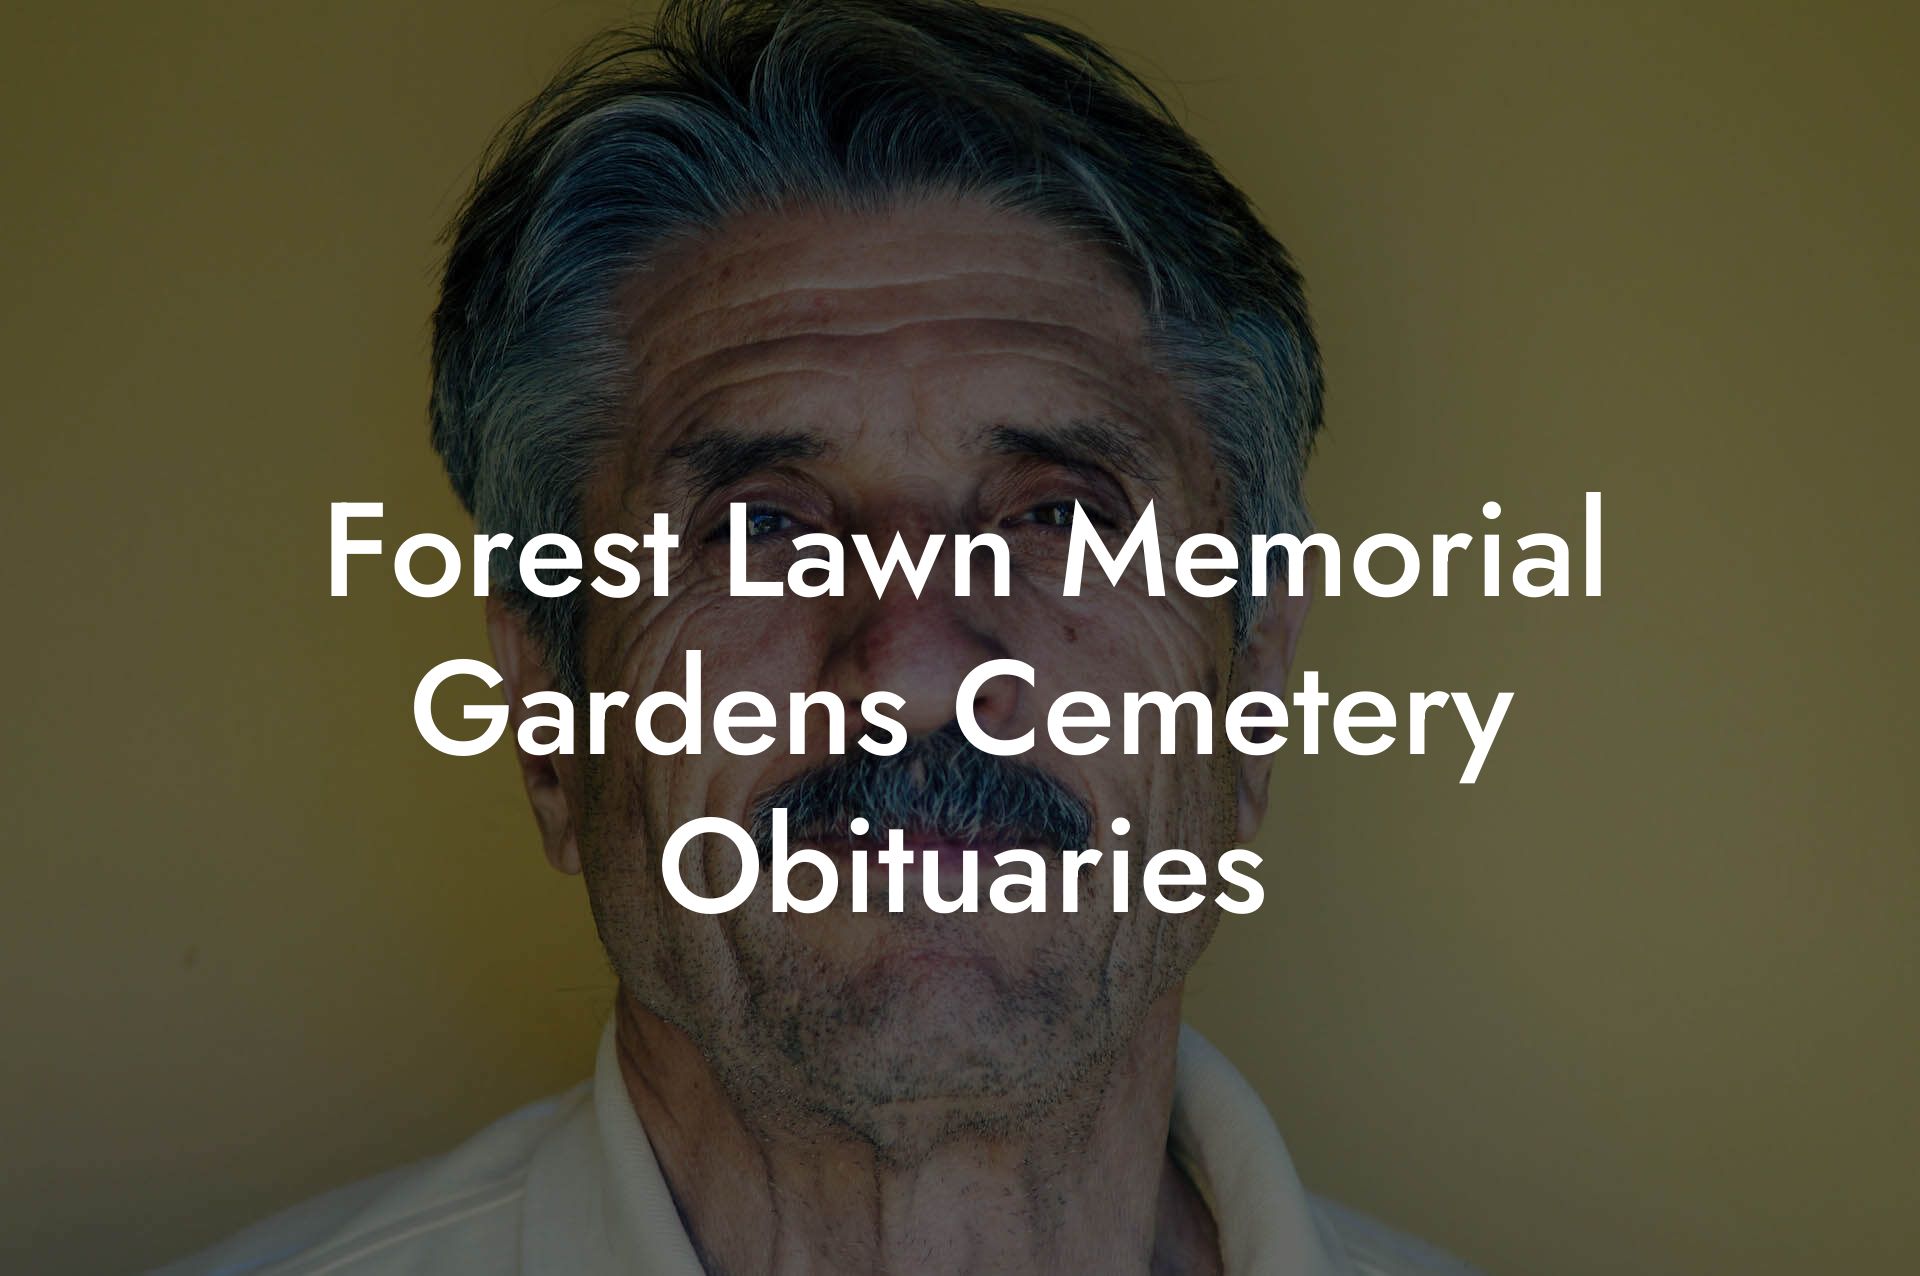 Forest Lawn Memorial Gardens Cemetery Obituaries